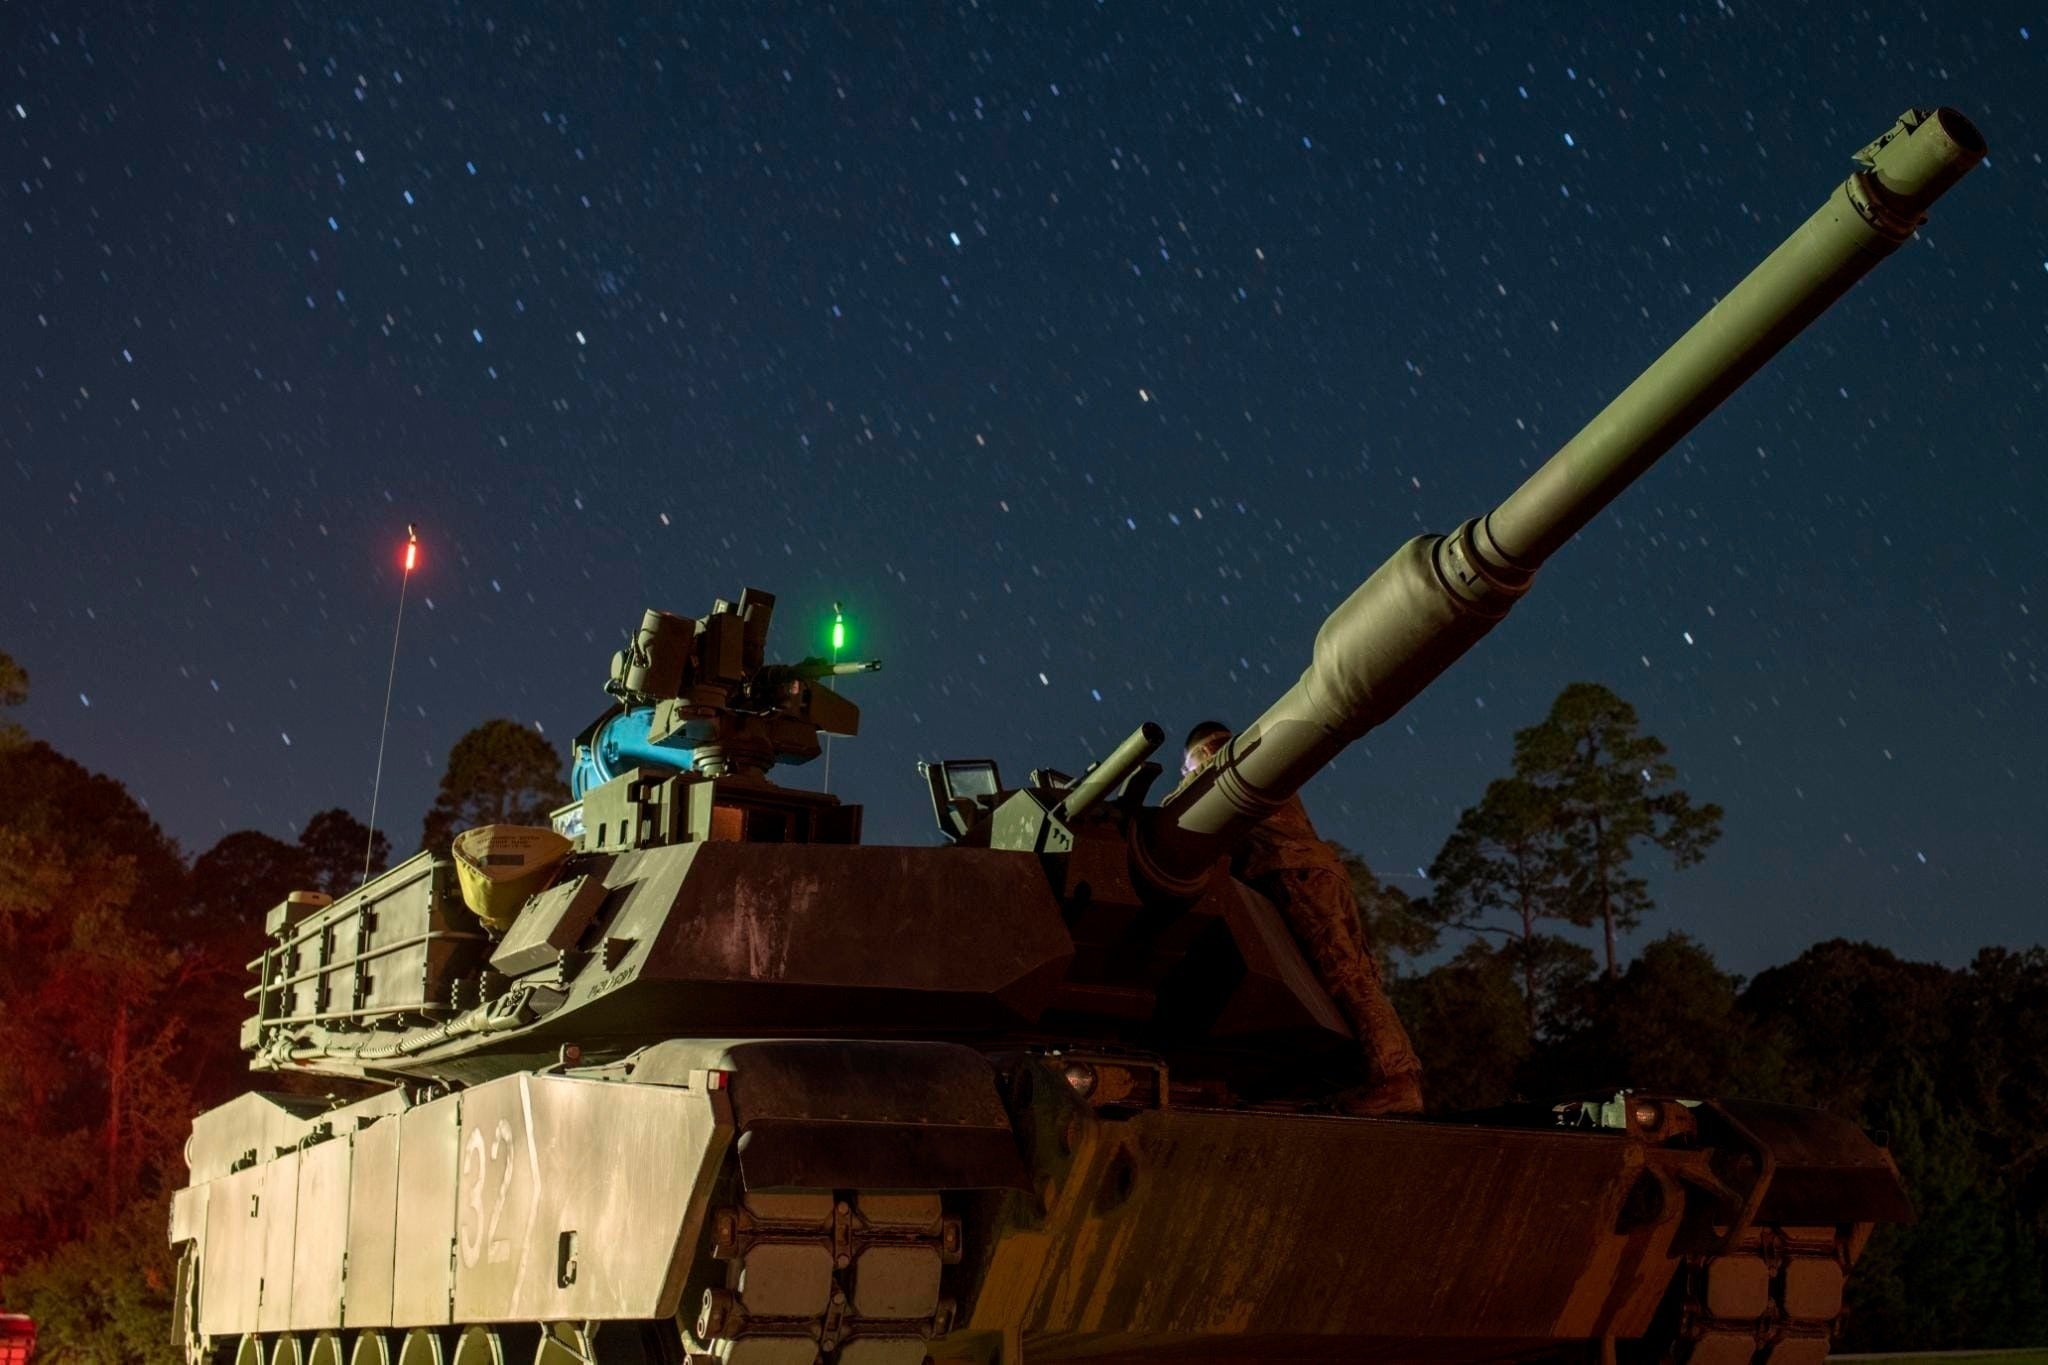 A modernized M1A2 SEPv3 Abrams tank assigned to Bravo Company, 2nd Battalion, 69th Armor Regiment, 2nd Armored Brigade Combat Team, waits in line for night Table VI operator new equipment training at Fort Stewart, Georgia, Sept. 24, 2022. The "Spartan Brigade," 2nd ABCT, 3rd ID, is the Army’s first brigade to complete modernization in accordance with the Army’s new Regionally Aligned Readiness and Modernization Model, or ReARMM, and is on glide path to execute a rotation at the National Training Center at Fort Irwin, California, to validate its readiness and proficiency to deploy, fight and win wherever and whenever the nation calls. (U.S. Army photo by 1st Lt. Jacob Swinson, Executive Officer for Bravo Company, 2nd Bn., 69th AR, 2nd ABCT)